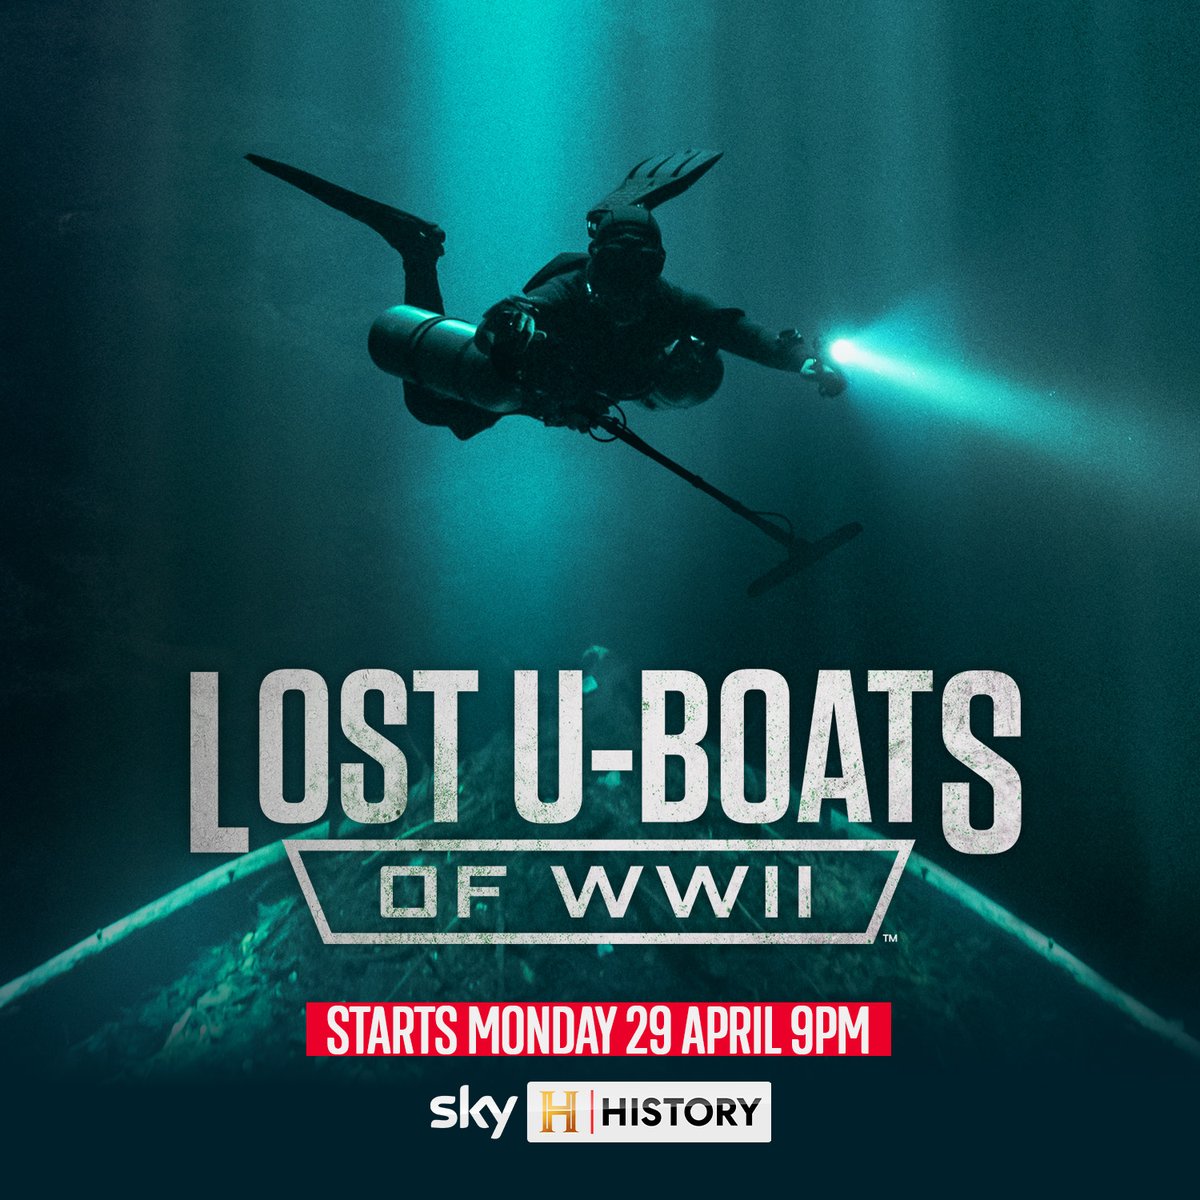 Do Nazi U-Boats loaded with stolen treasures lie at the bottom of the sea? 🤿 Prepare to dive deep and discover the answer in #LostUBoatsOfWWII. 📺 Starts Monday 29 April 9pm